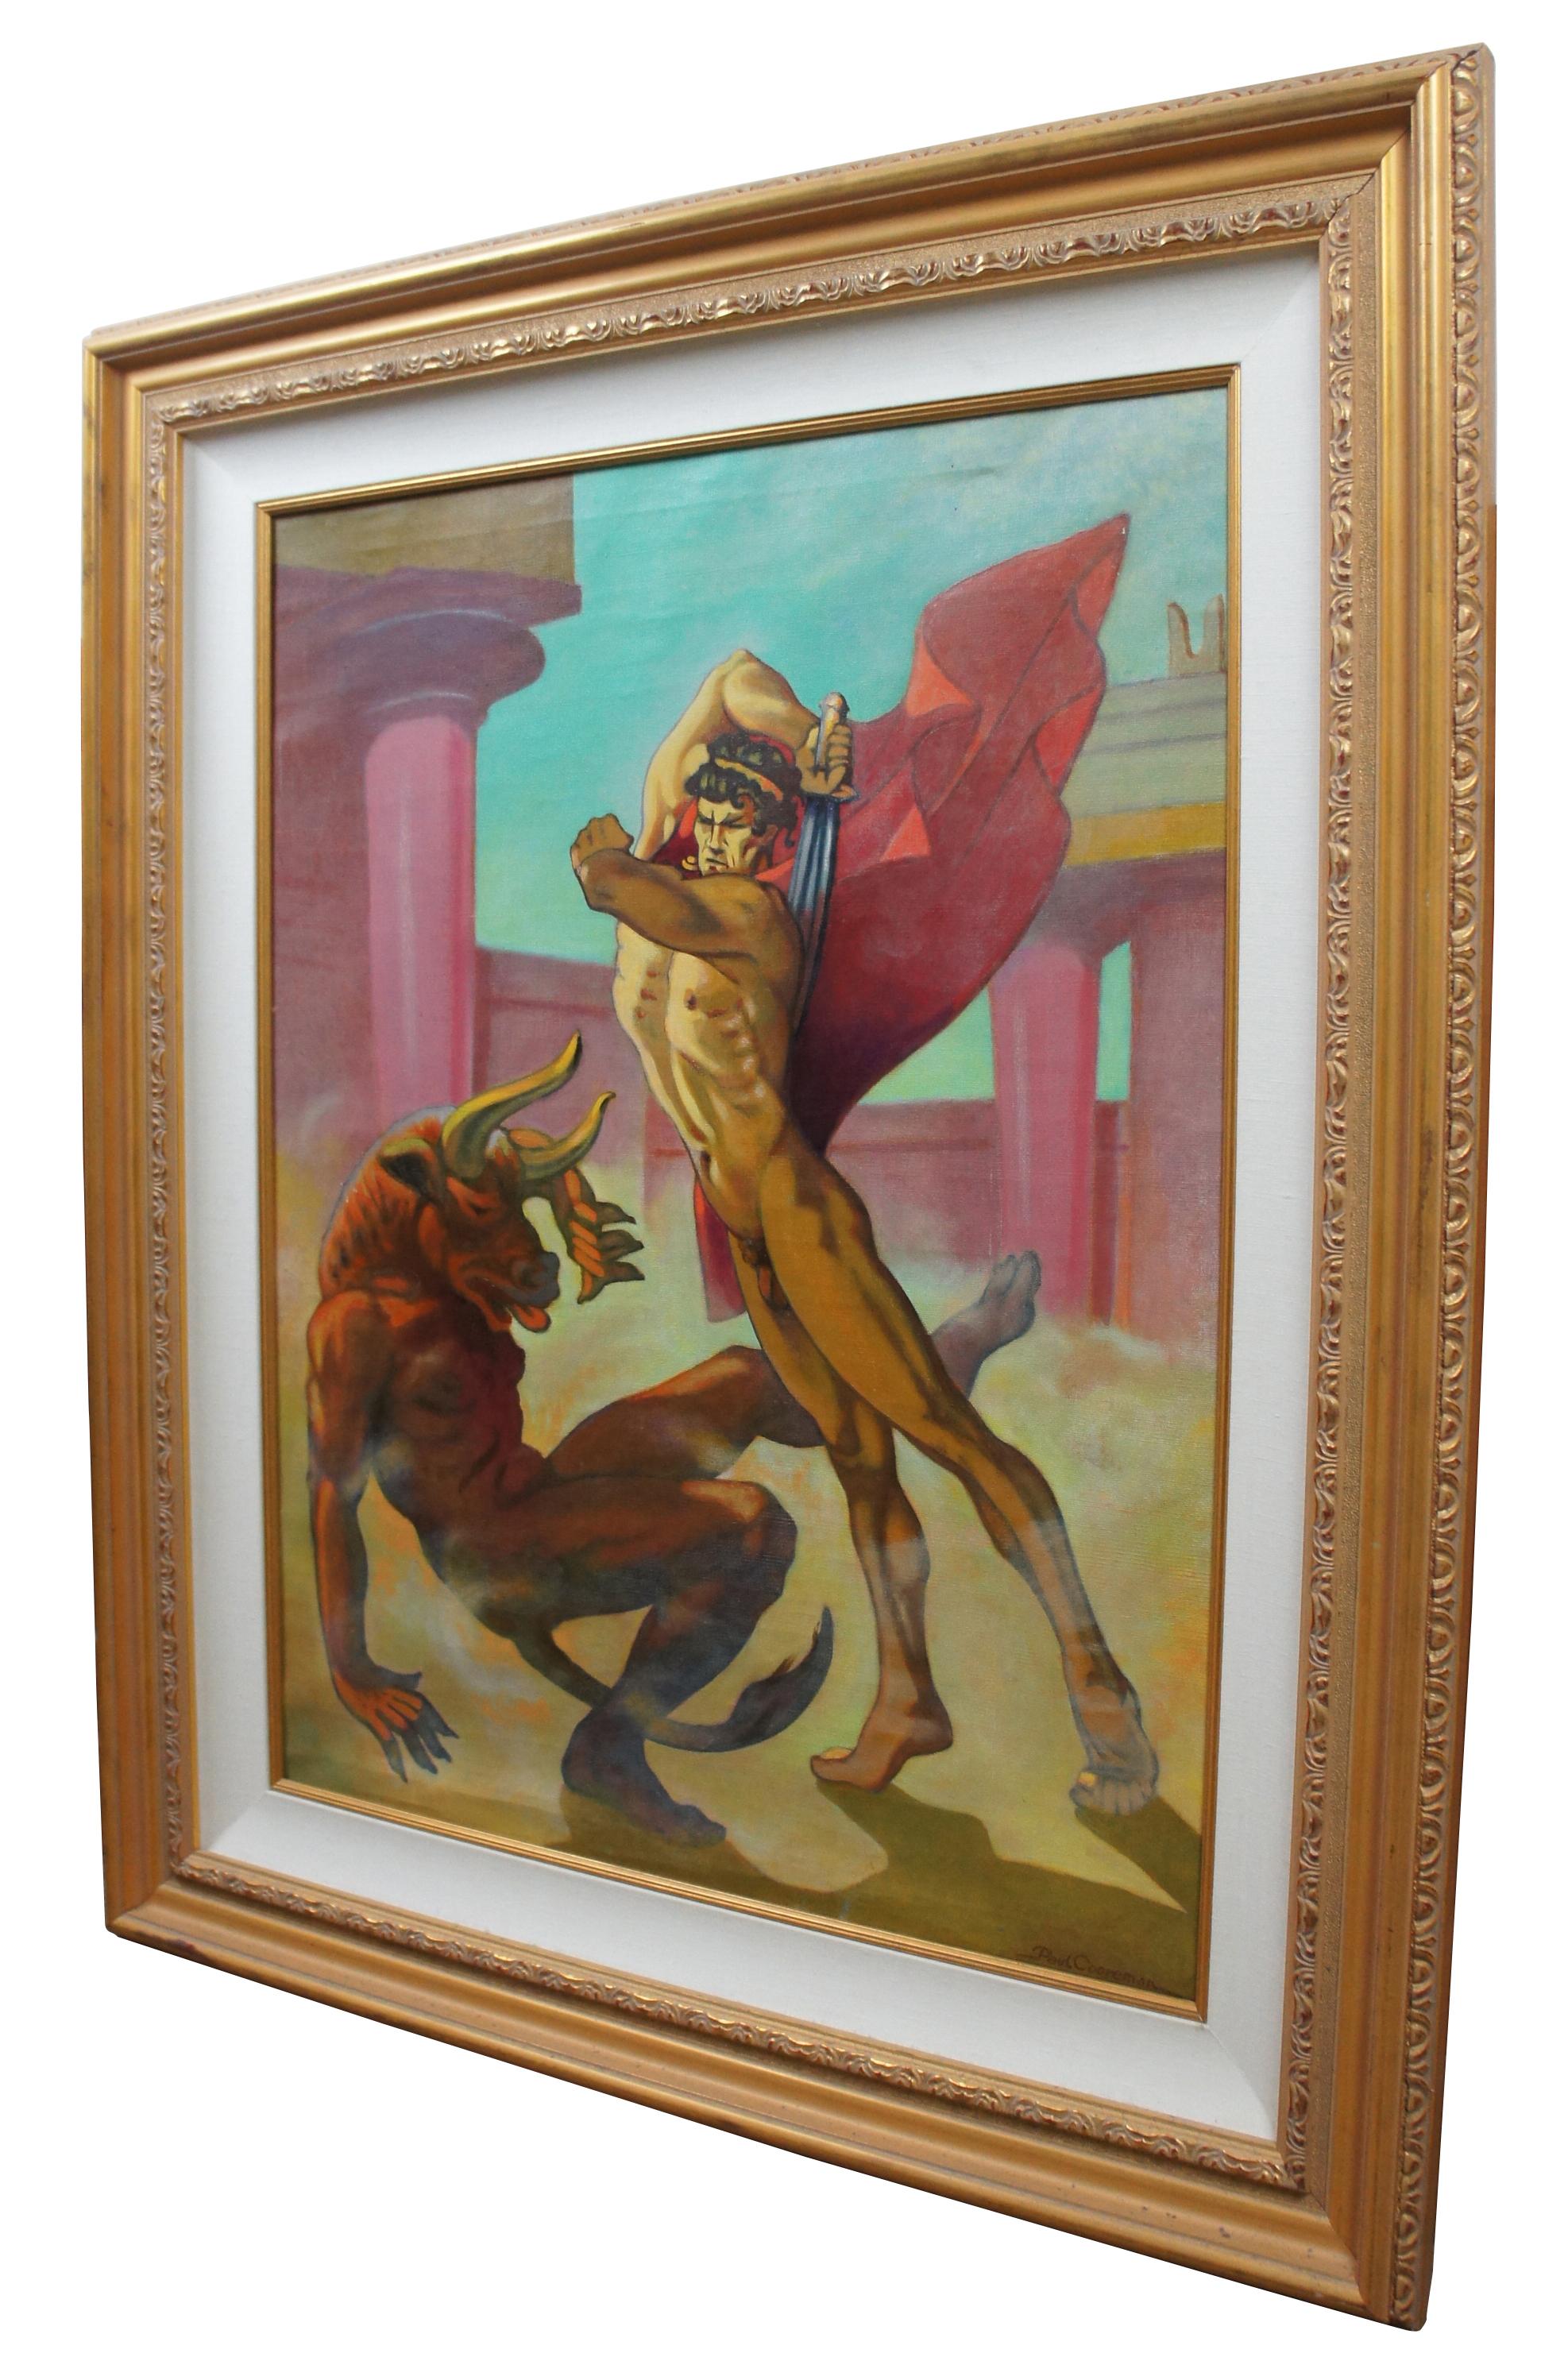 Oil on canvas painting by Paul Cooreman showing the mythological Greek hero Theseus in the act of slaying the Minotaur. / BIO: Paul Cooreman was active/lived in Belgium. Paul Cooreman is known for Painting. Born in 1910, Paul Cooreman's creative